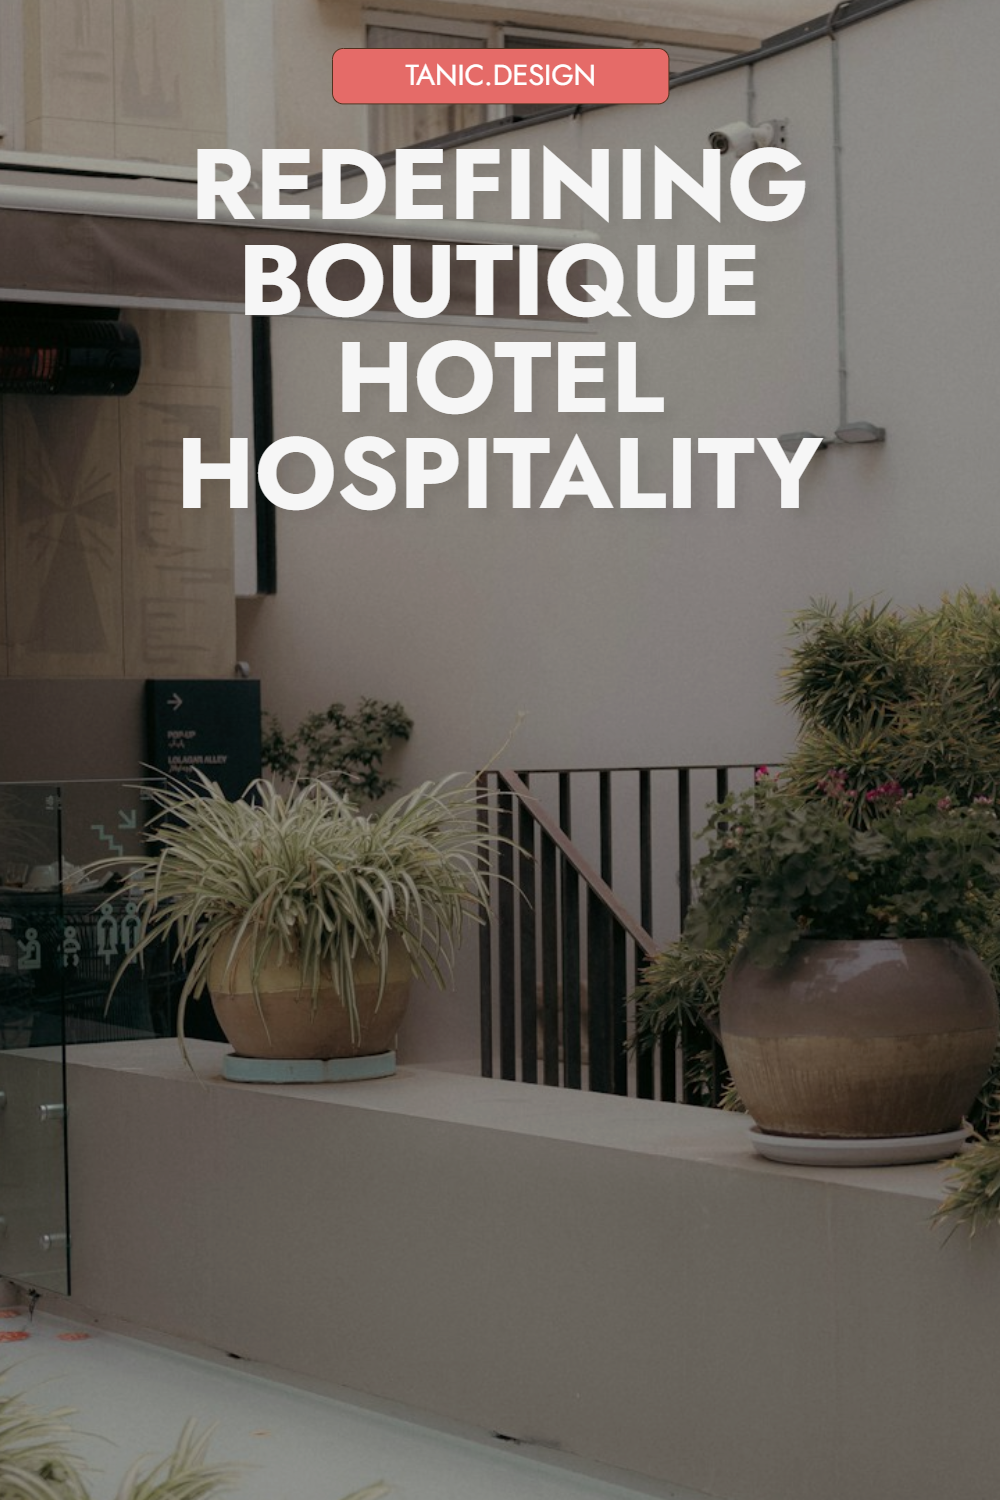 Guide to Boutique Hotel Hospitality